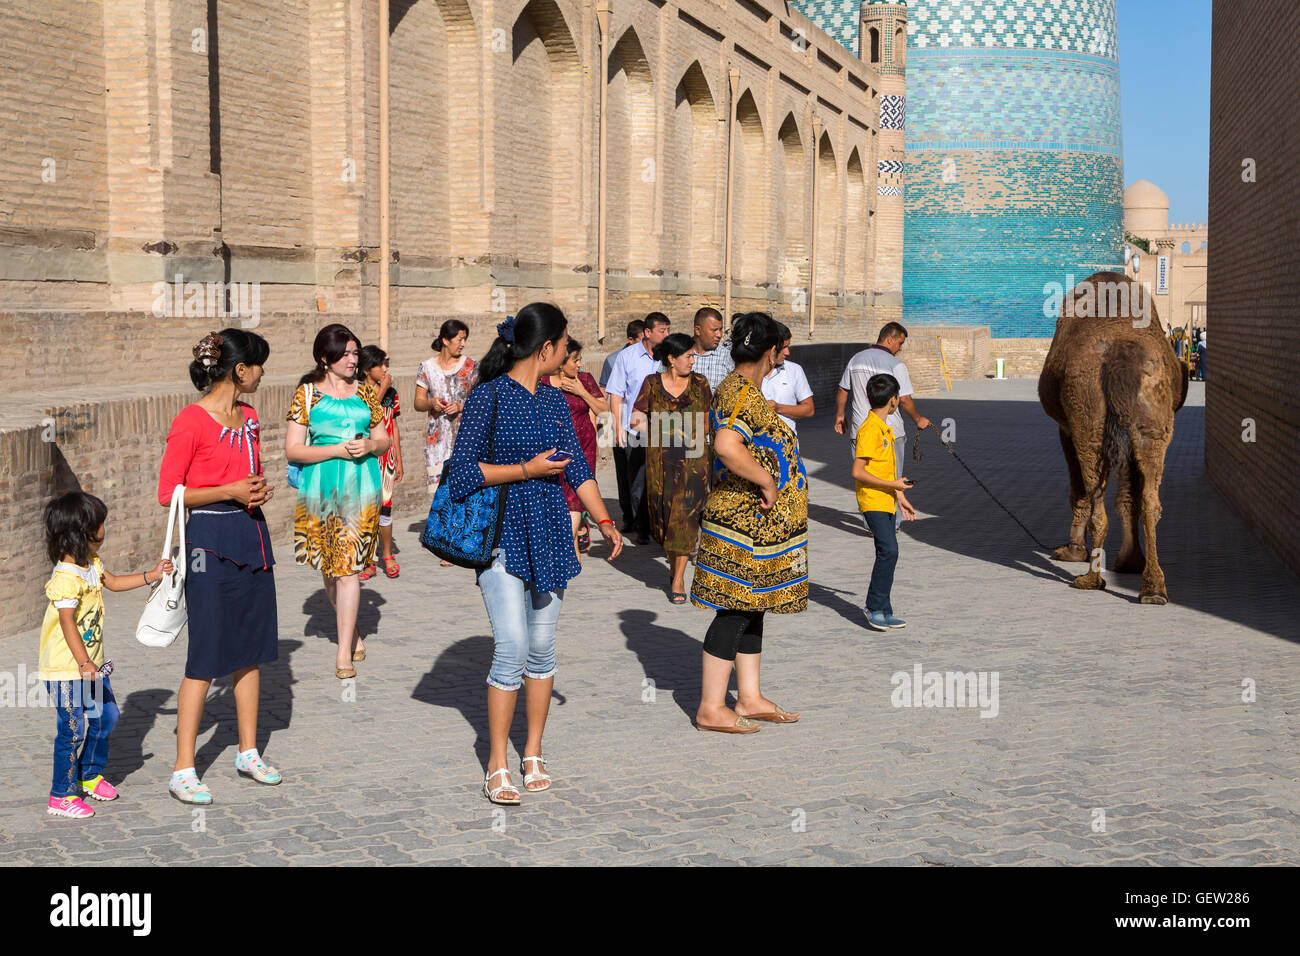 People looking at the camel in Khiva, Uzbekistan. Stock Photo